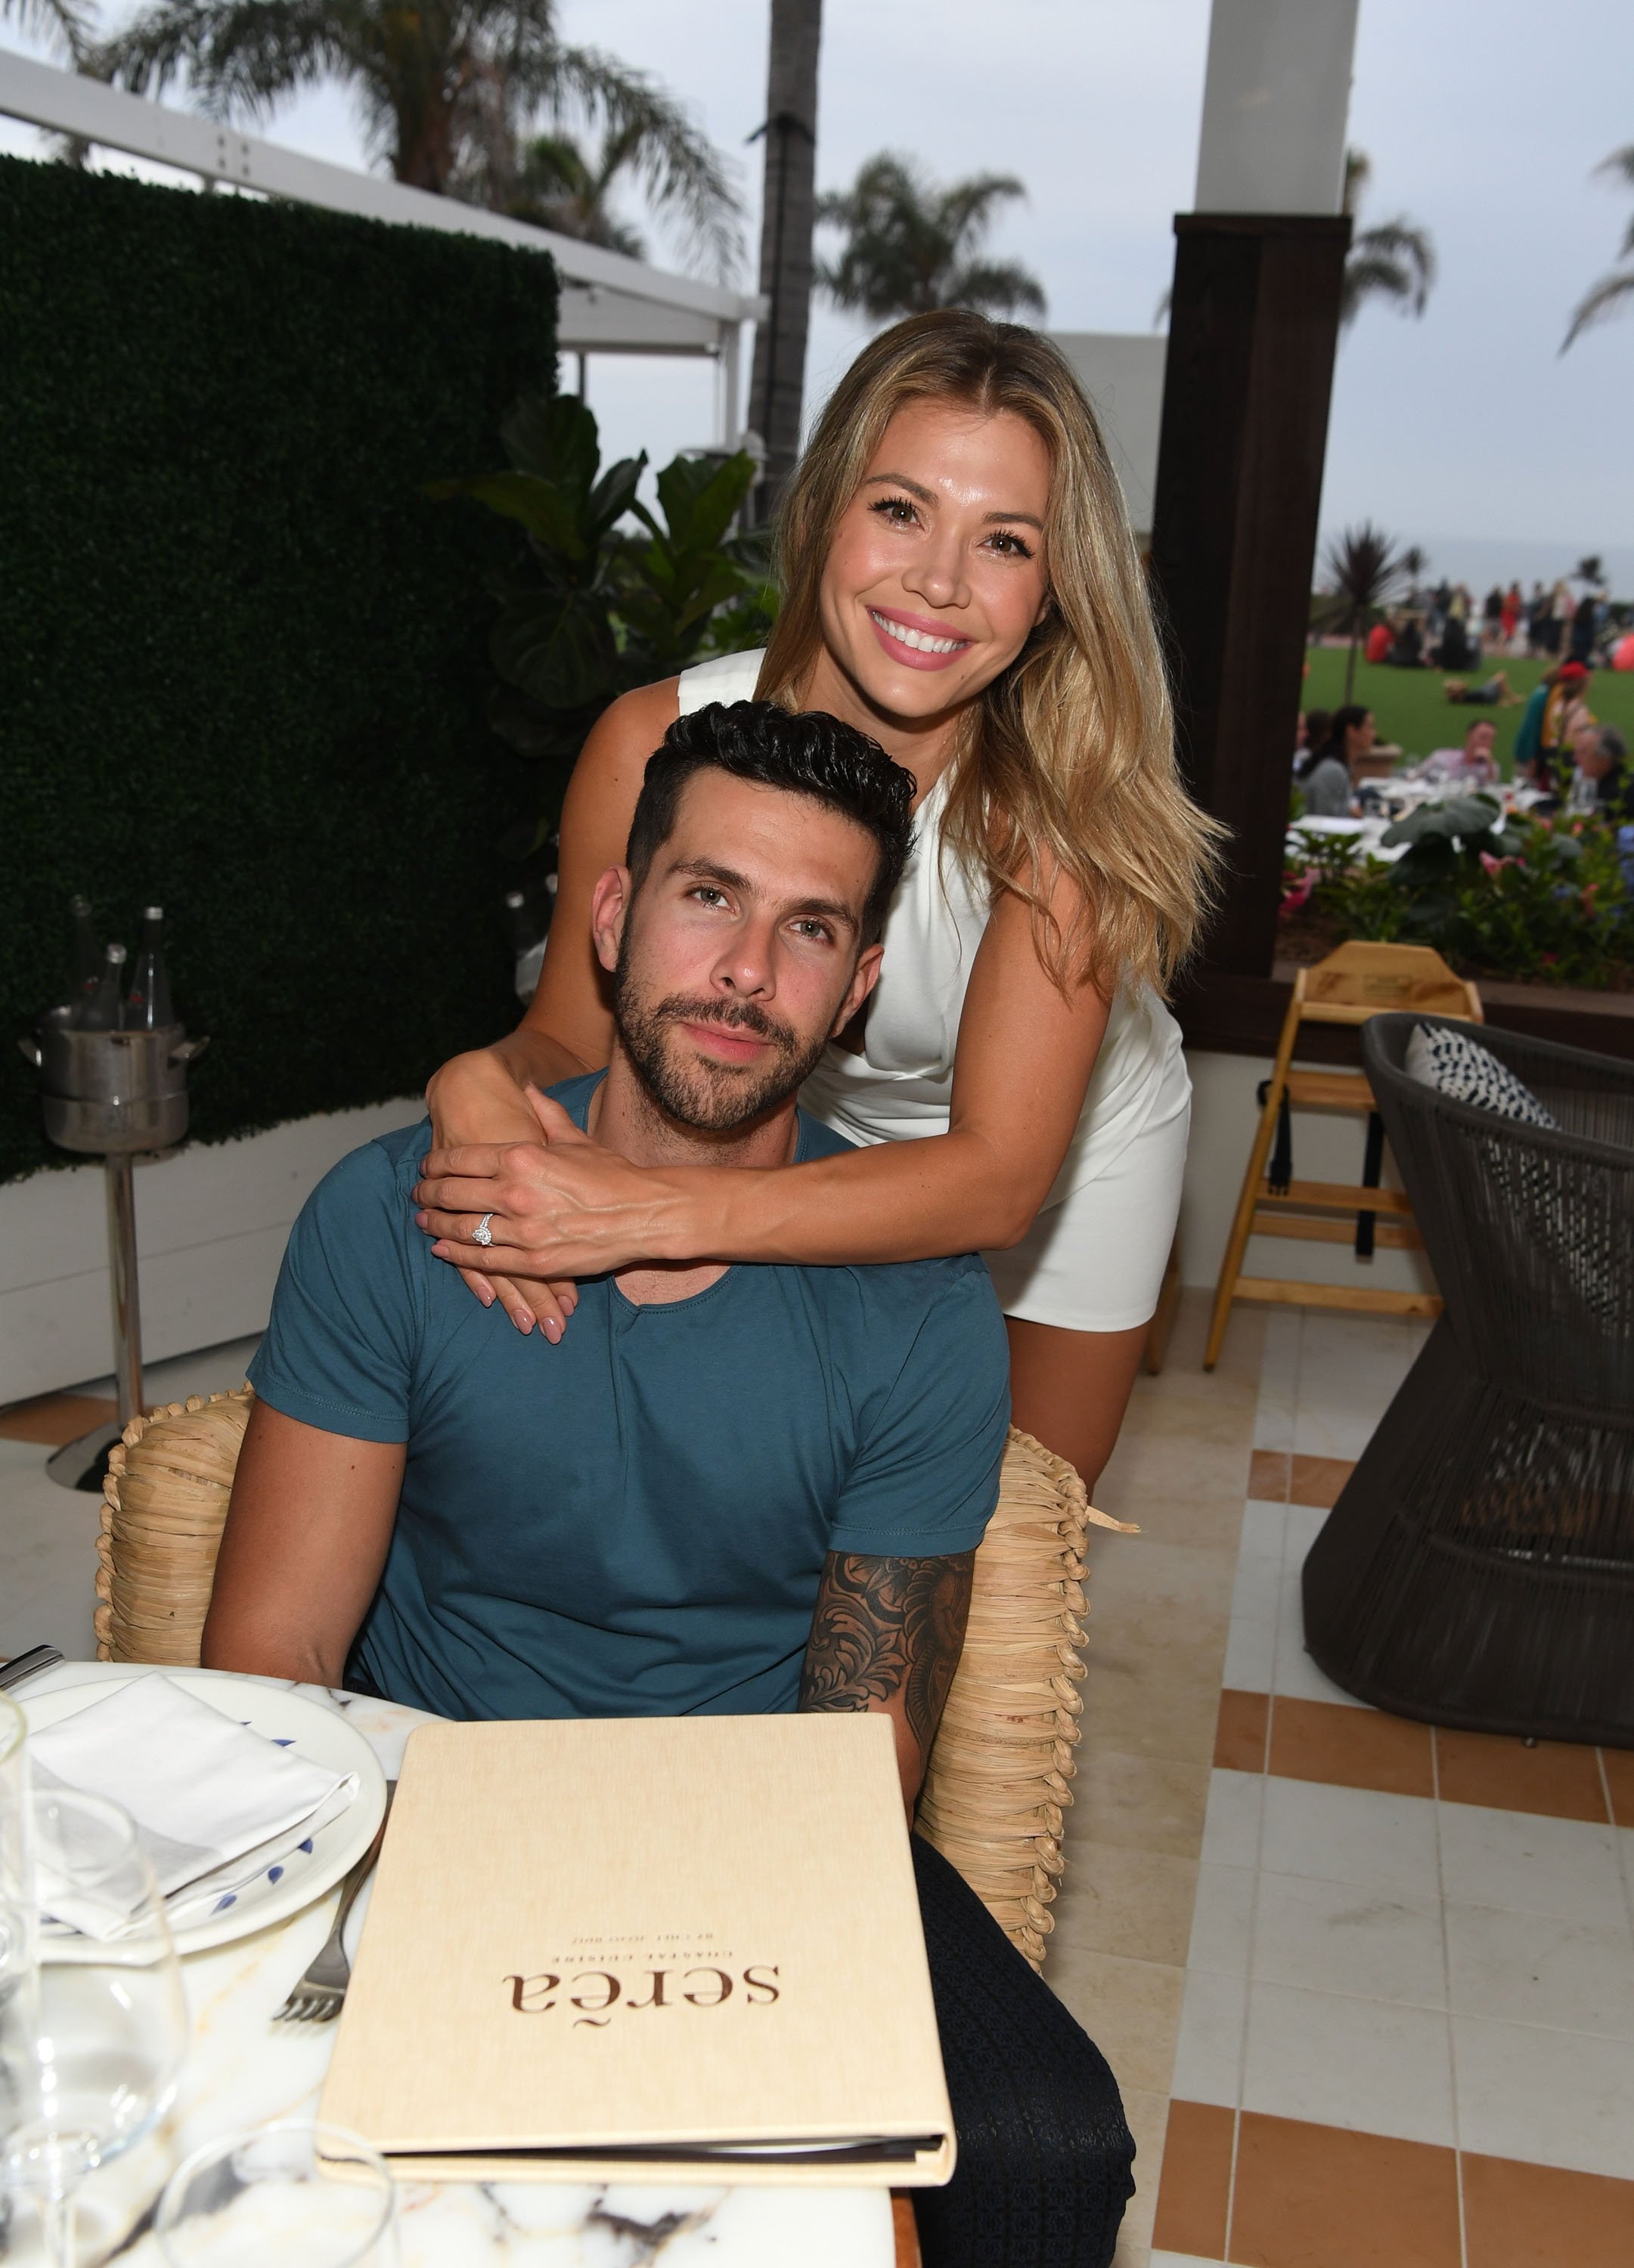 Krystal Nielson and Chris Randone at the opening weekend of Serea restaurant at Hotel Del Coronado in Coronado, California Photo: Denise Truscello/Getty Images for Clique Hospitality